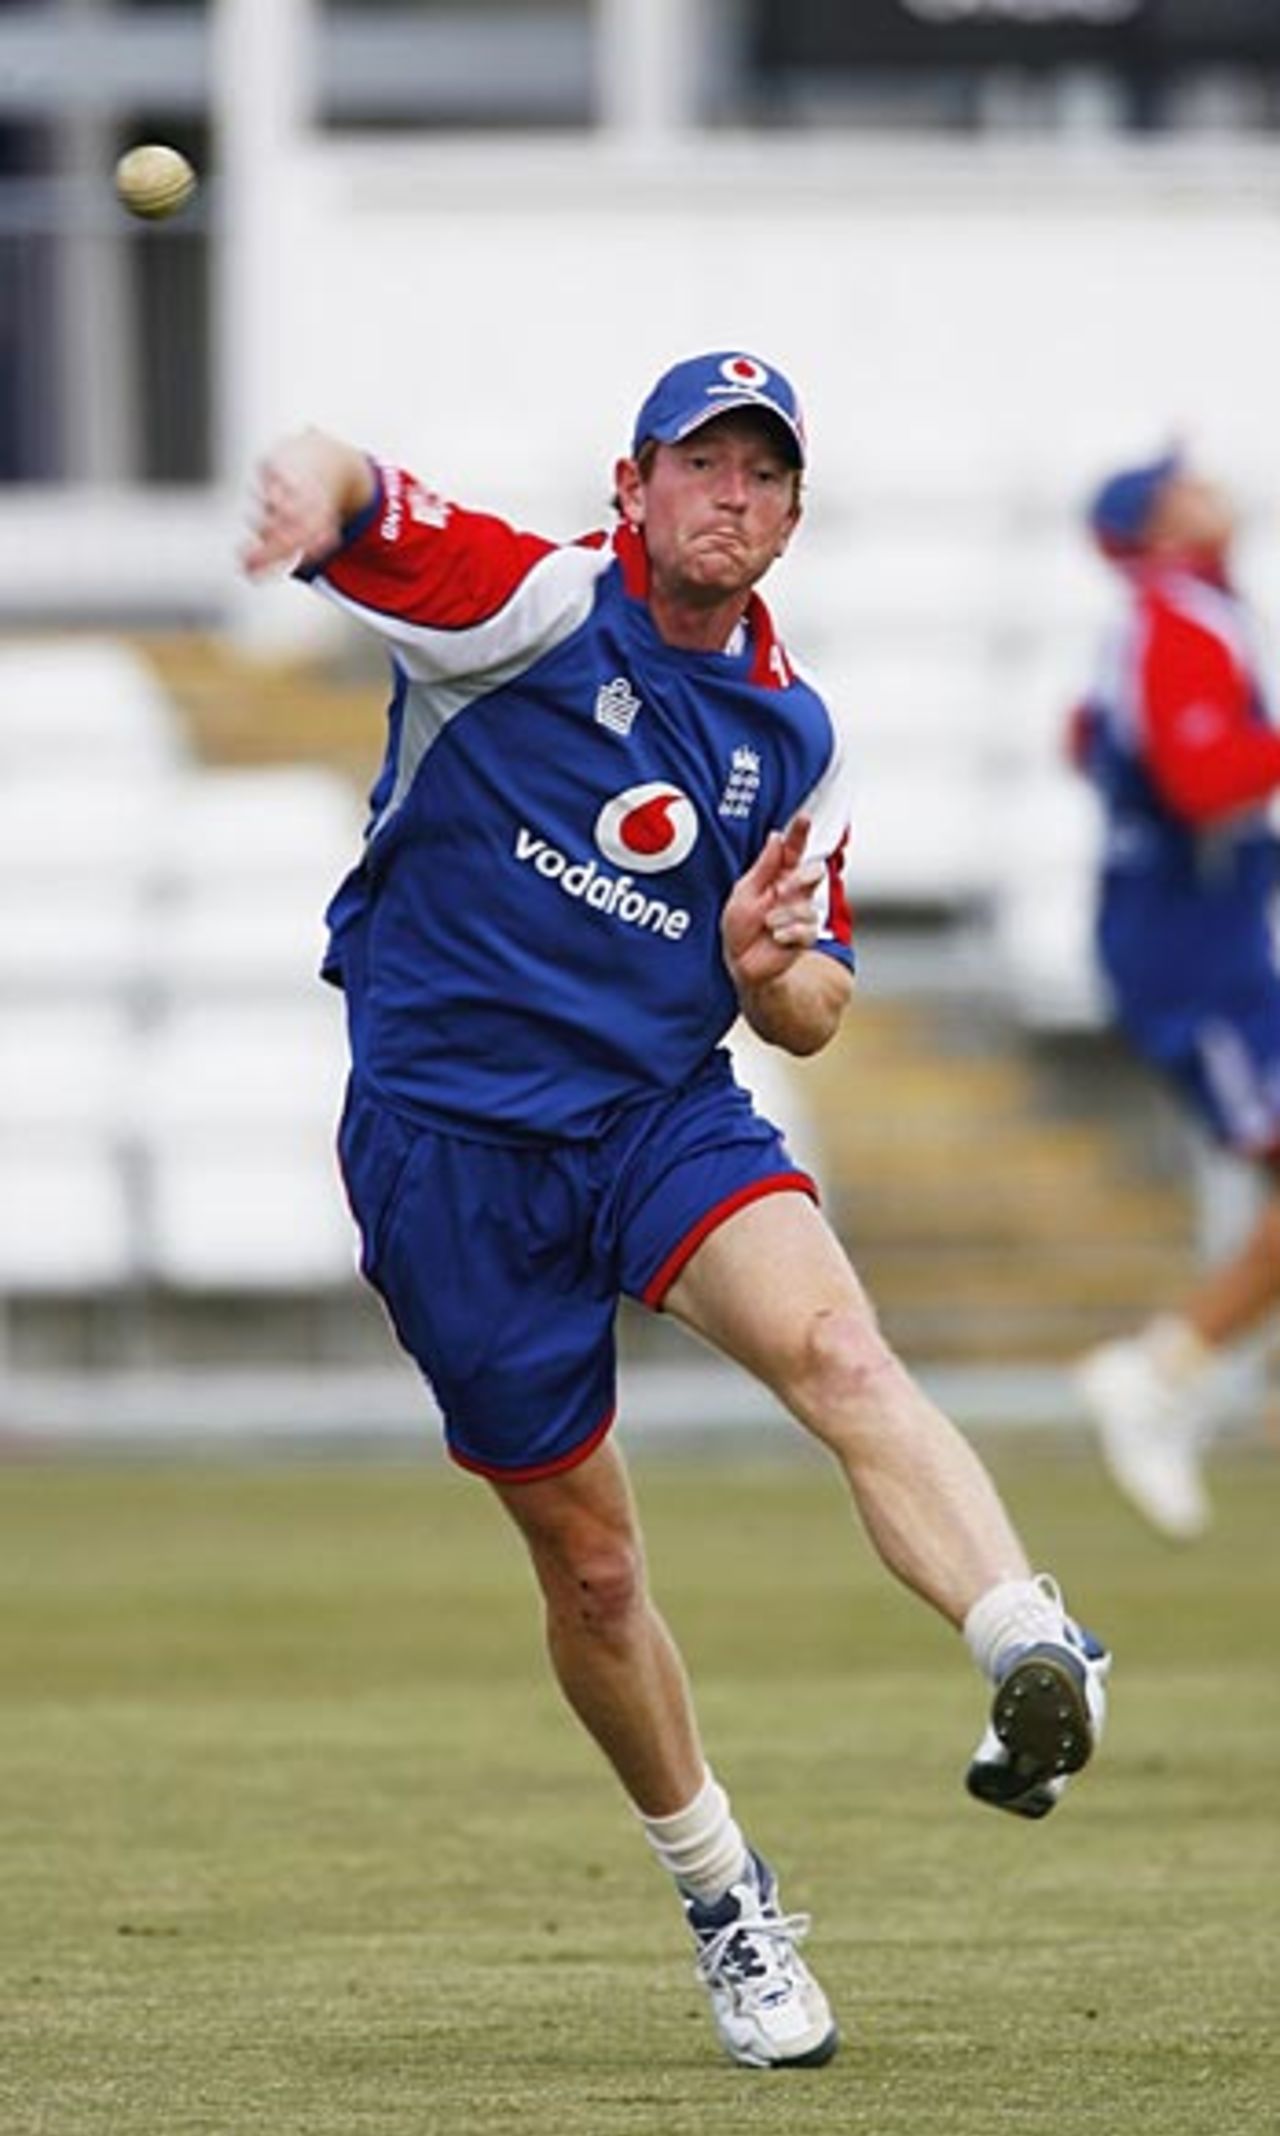 Paul Collingwood fires in a throw during a training session ahead of the 3rd ODI against Sri Lanka, Riverside, June 23, 2006